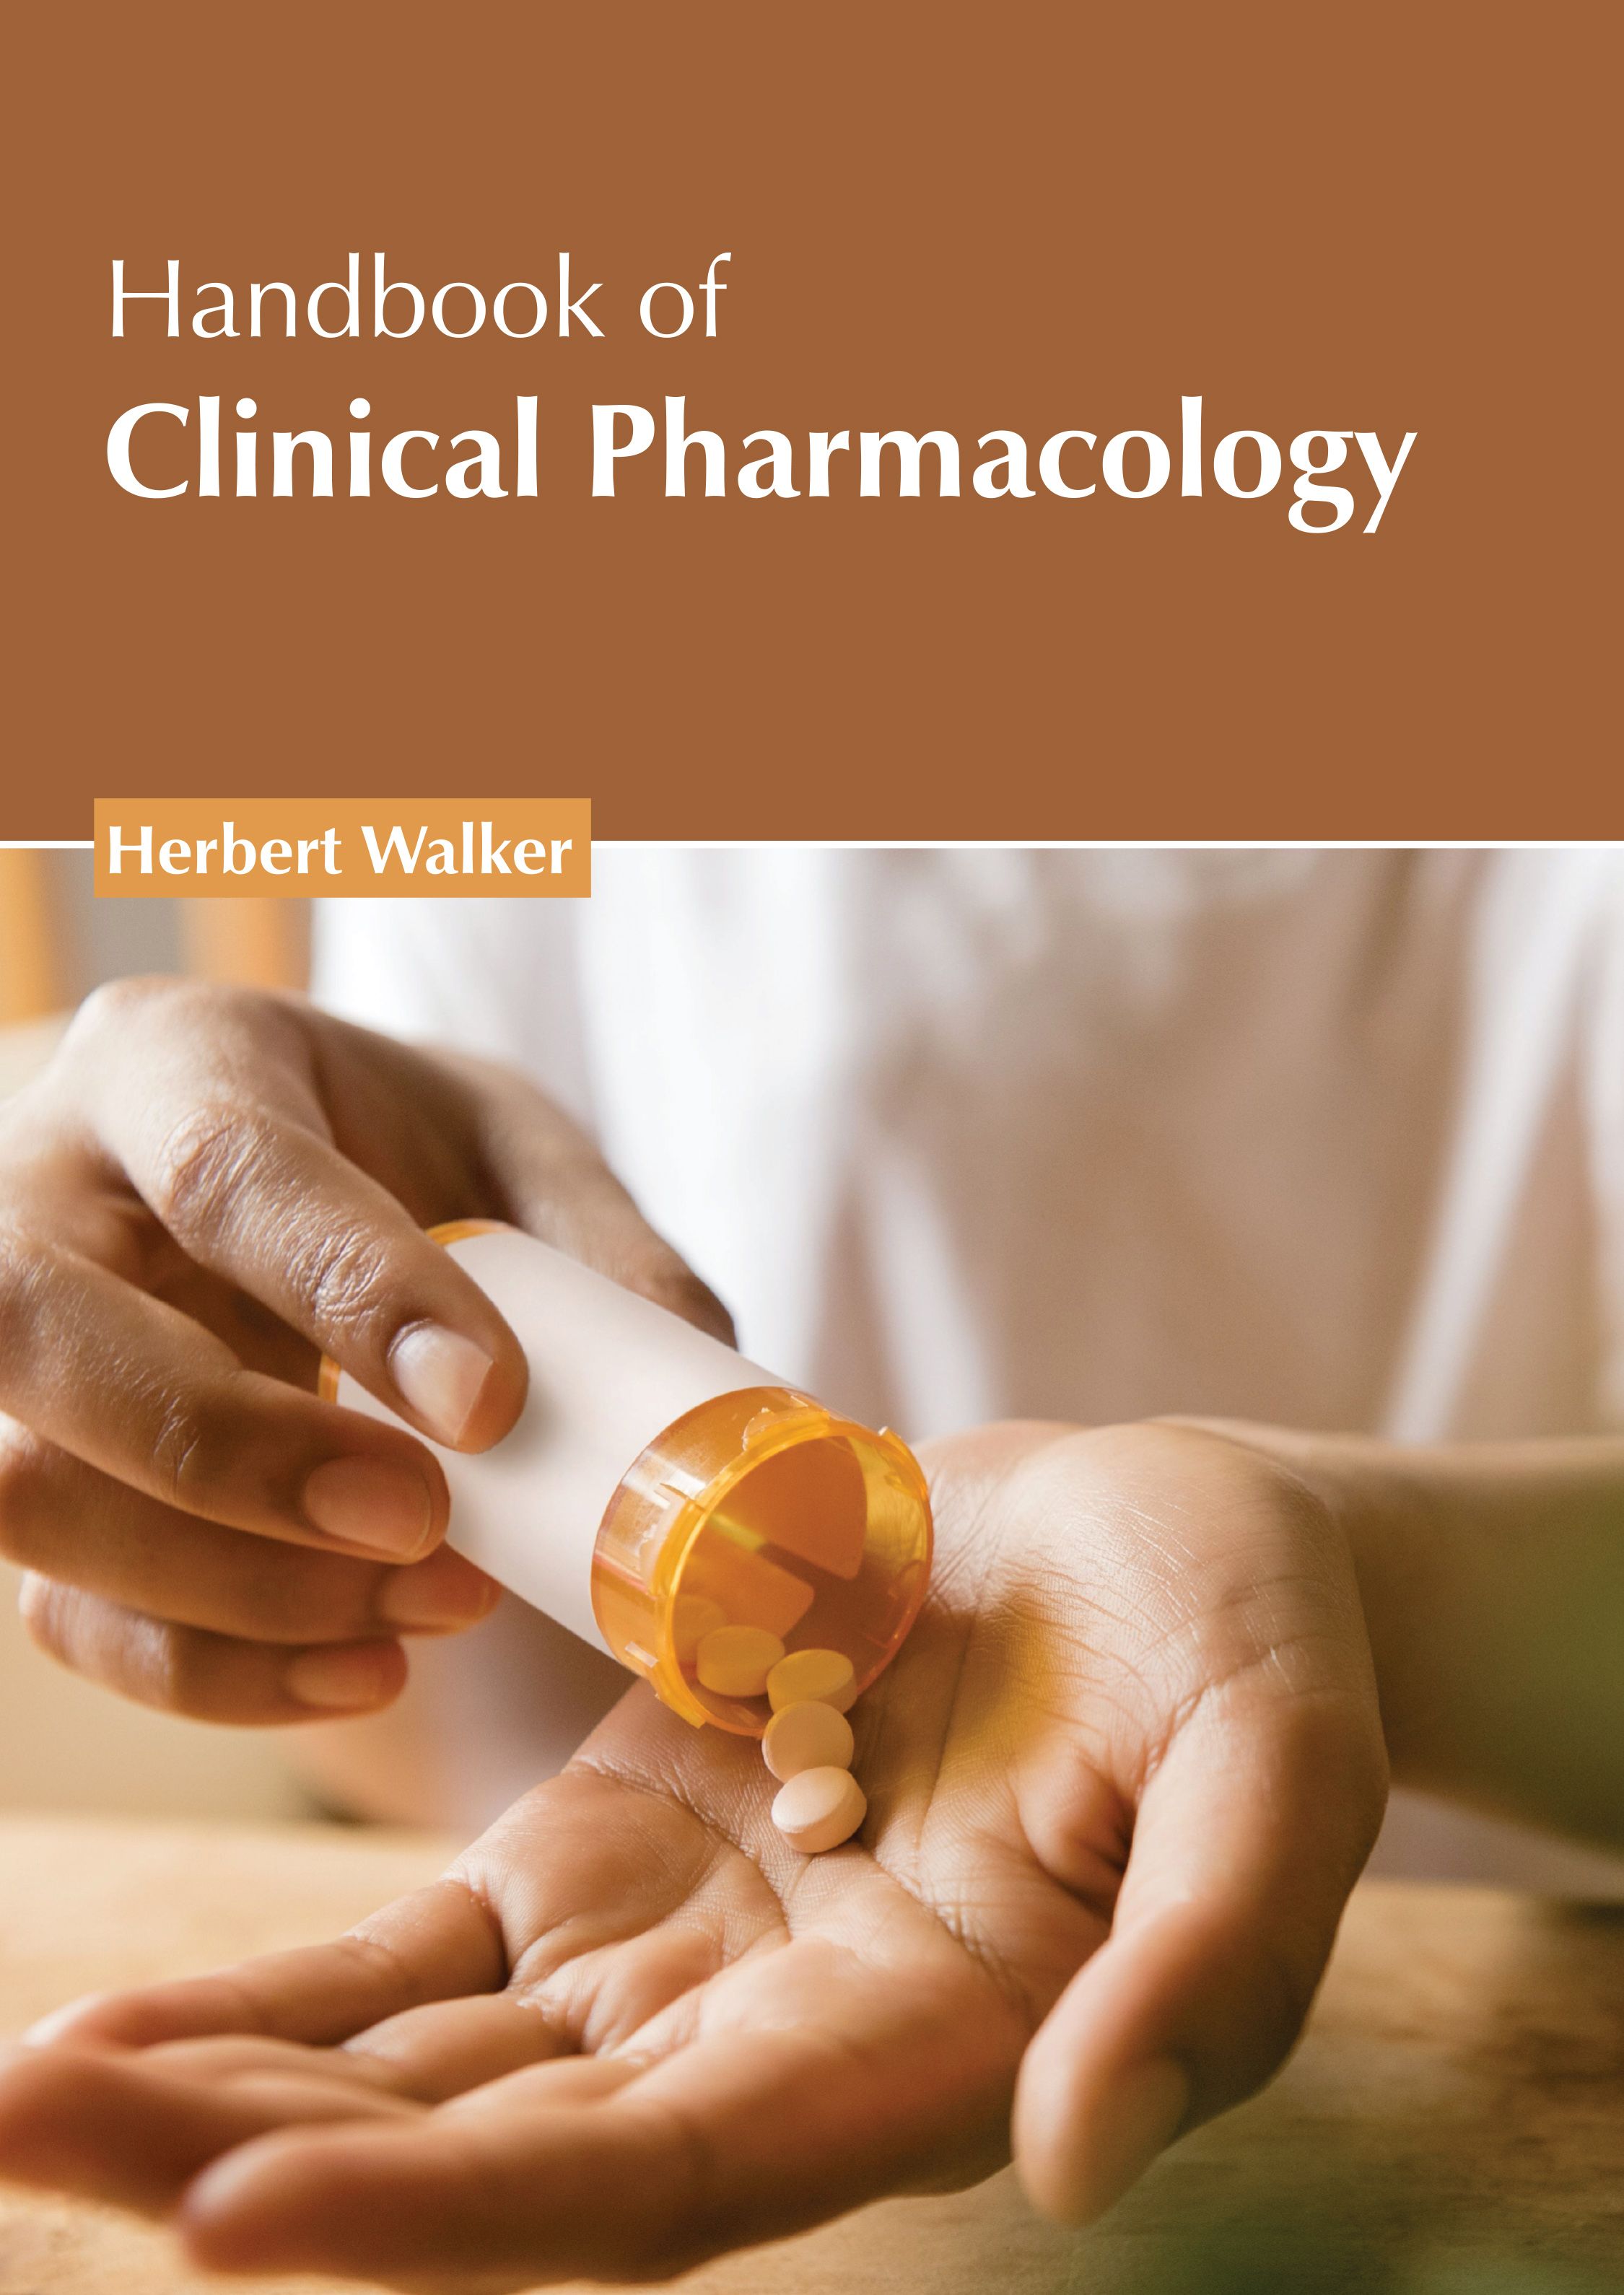 HANDBOOK OF CLINICAL PHARMACOLOGY